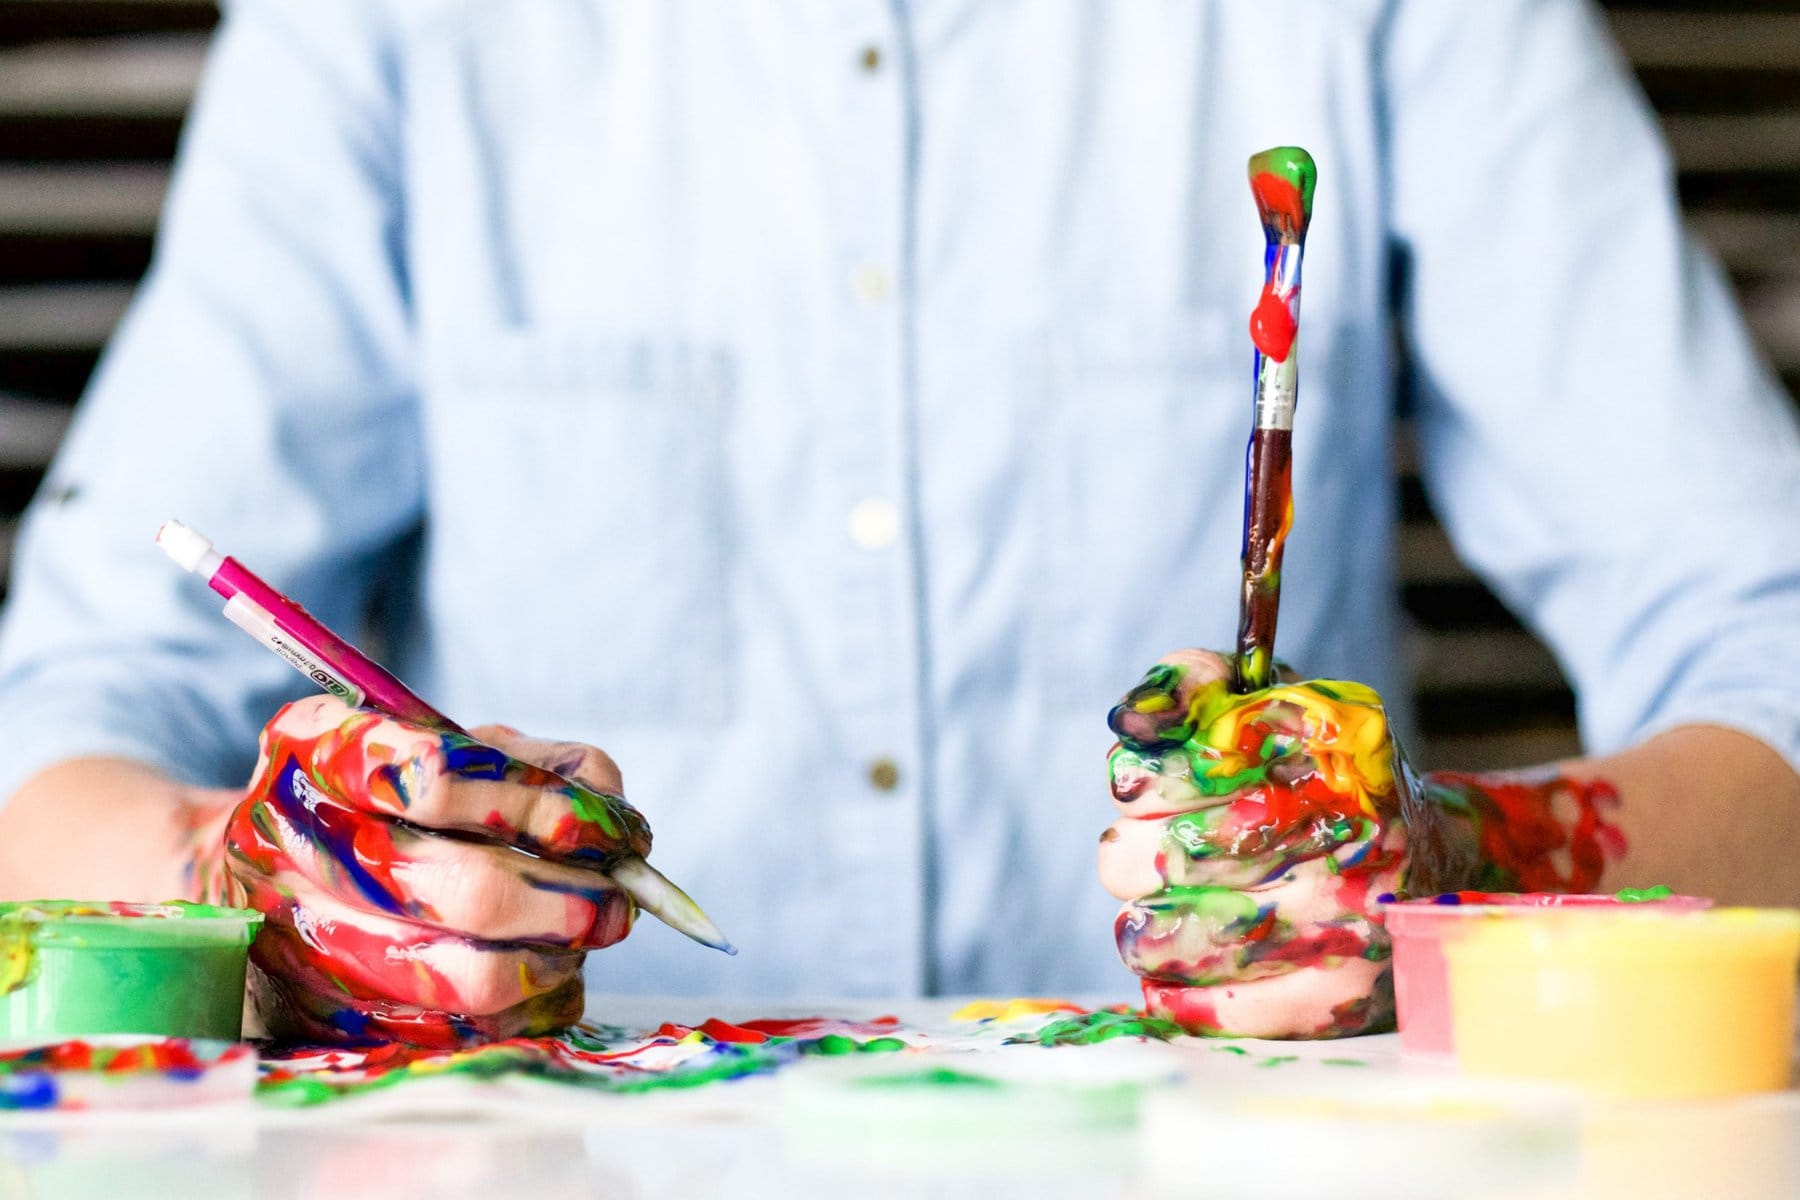 Man's hands covered with paint holding a paintbrush